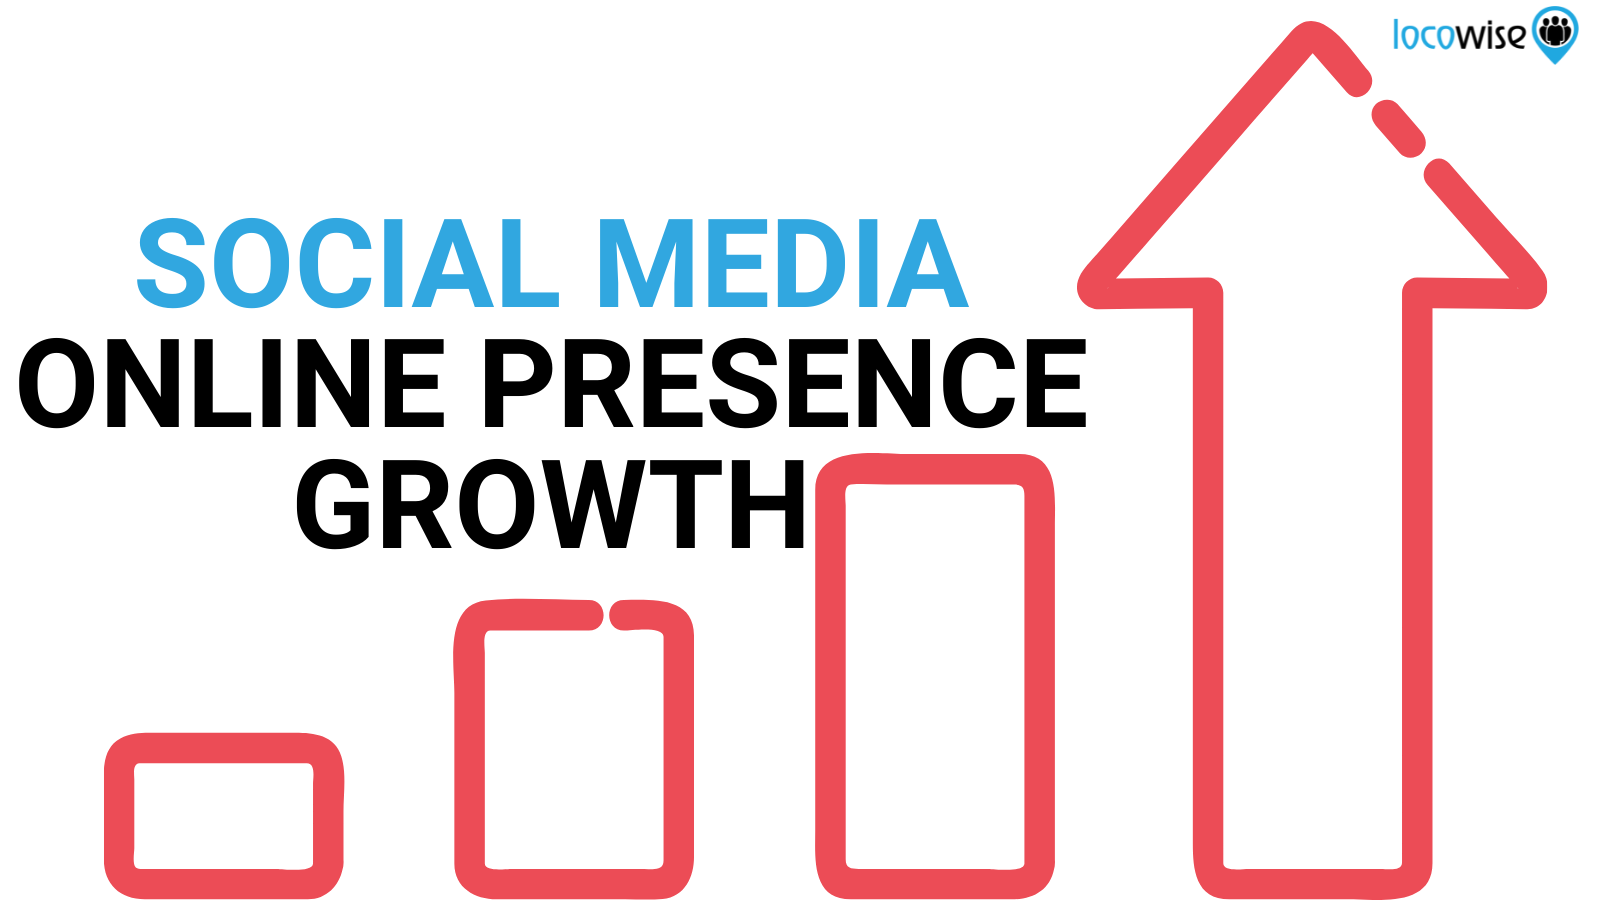 Social Media Marketer’s Guide To Growing Your Online Presence